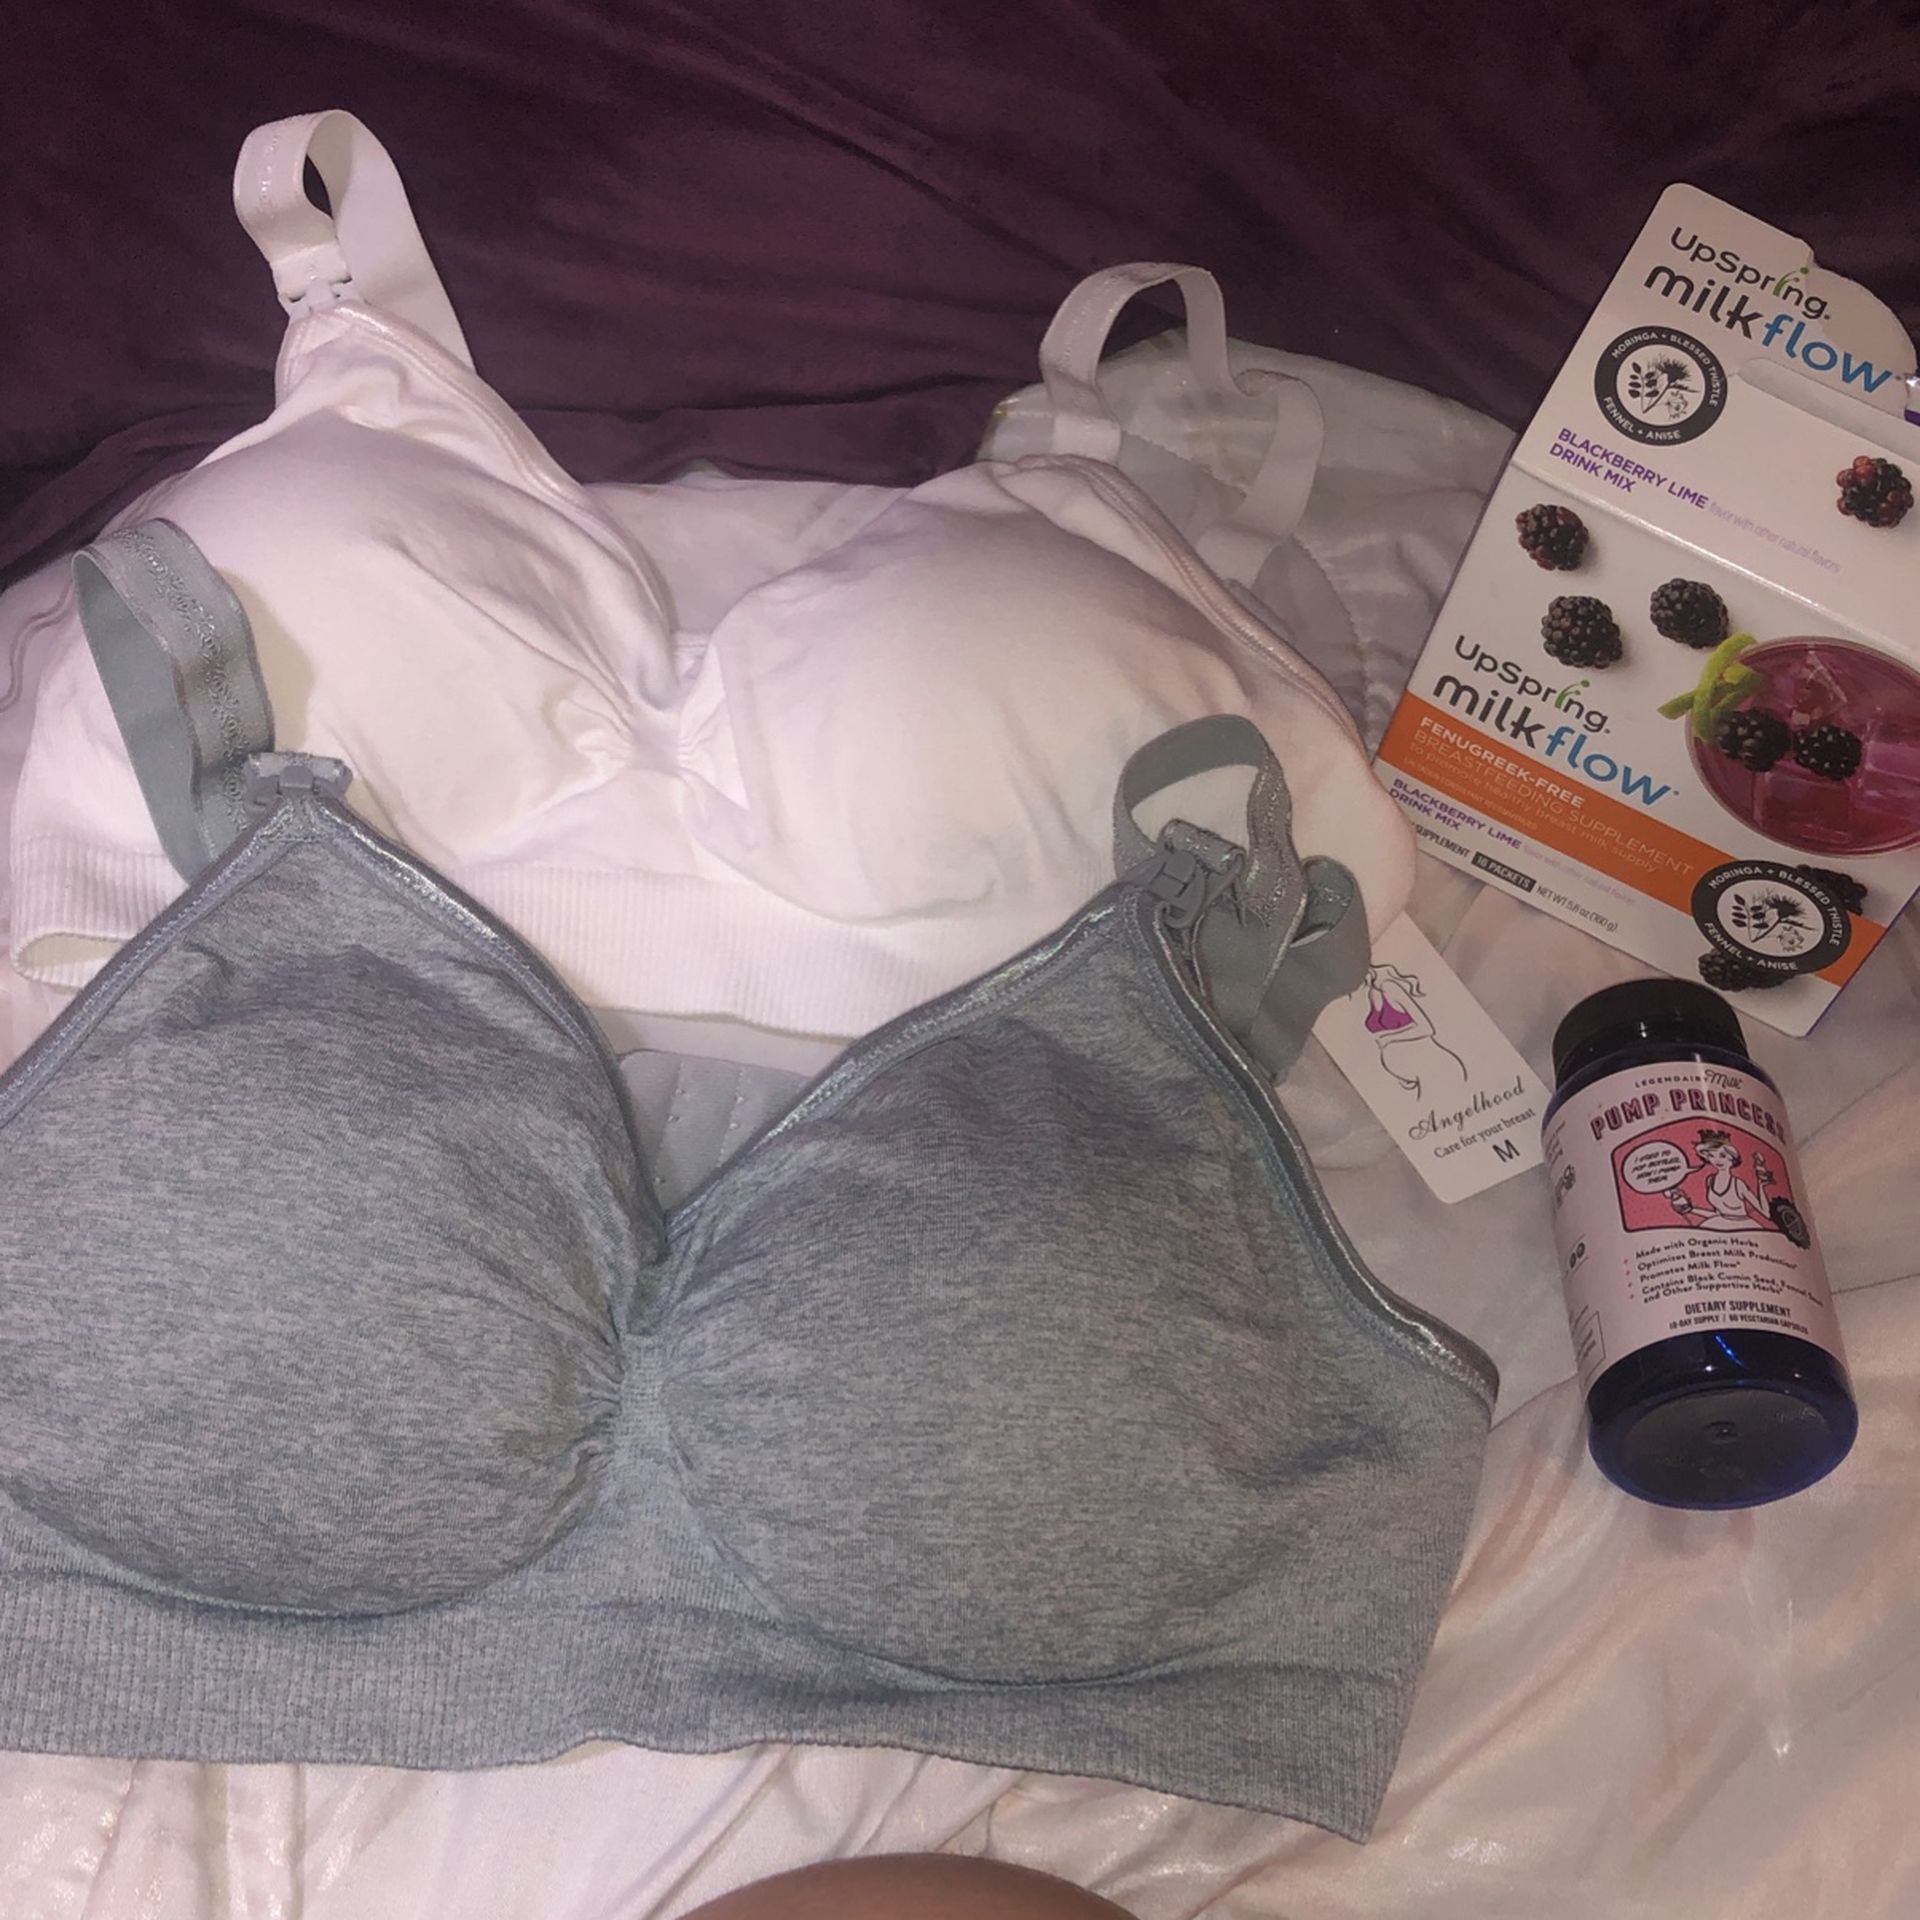 Nursing Bra With Drink Mix And Pills. For Breast Milk Productio  